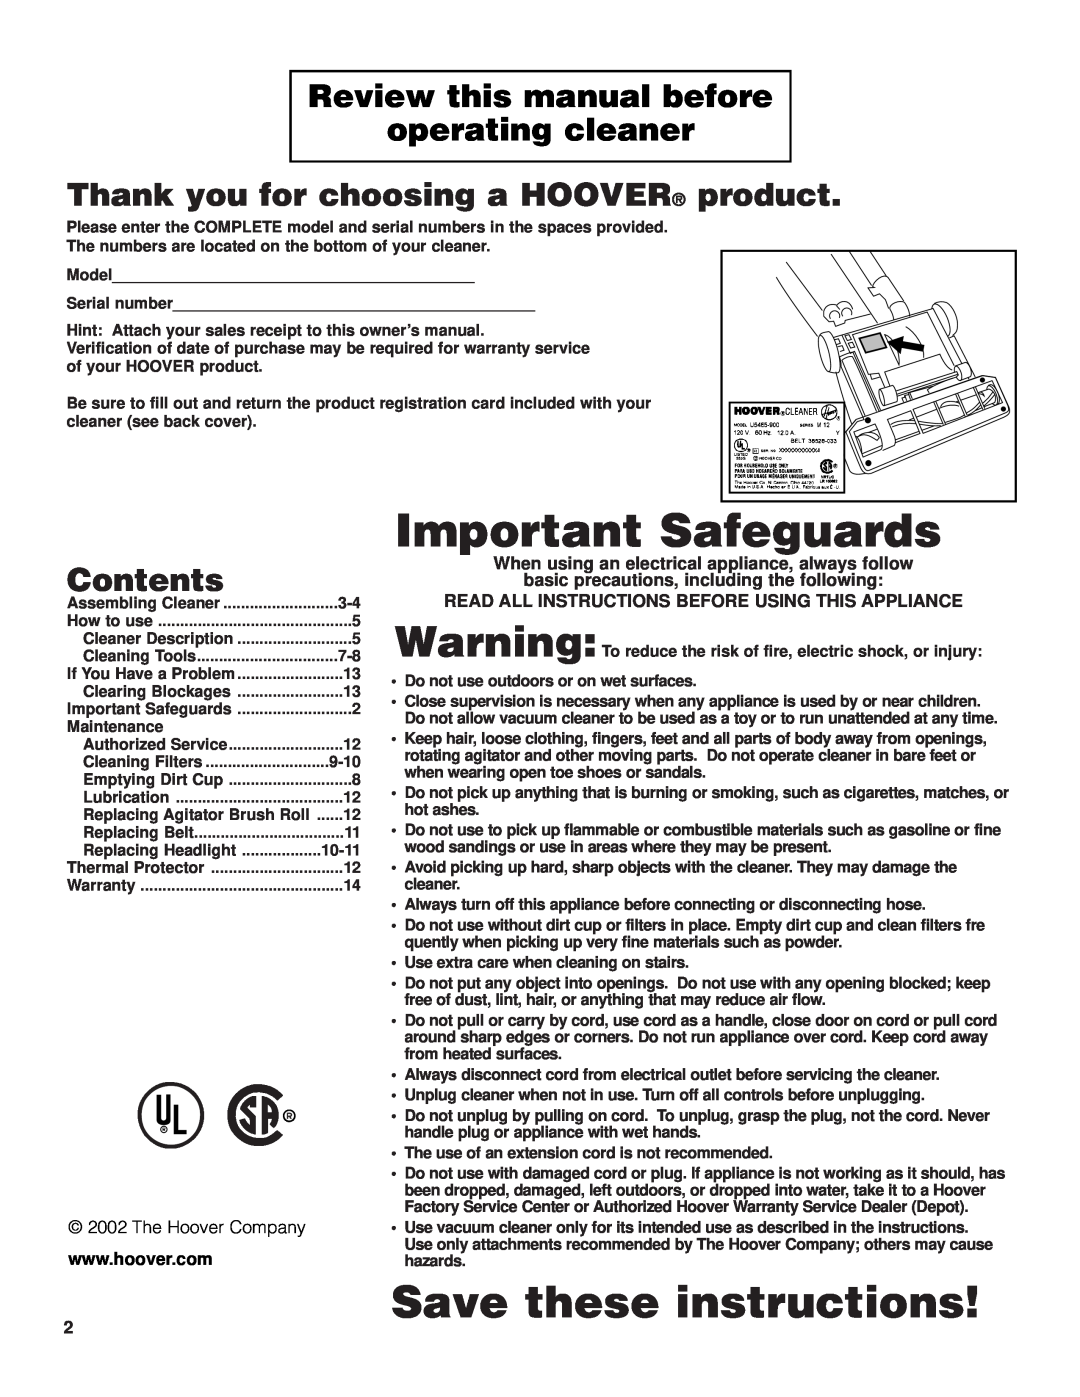 Hoover U5361950 Review this manual before operating cleaner, Thank you for choosing a HOOVER, product, Contents 